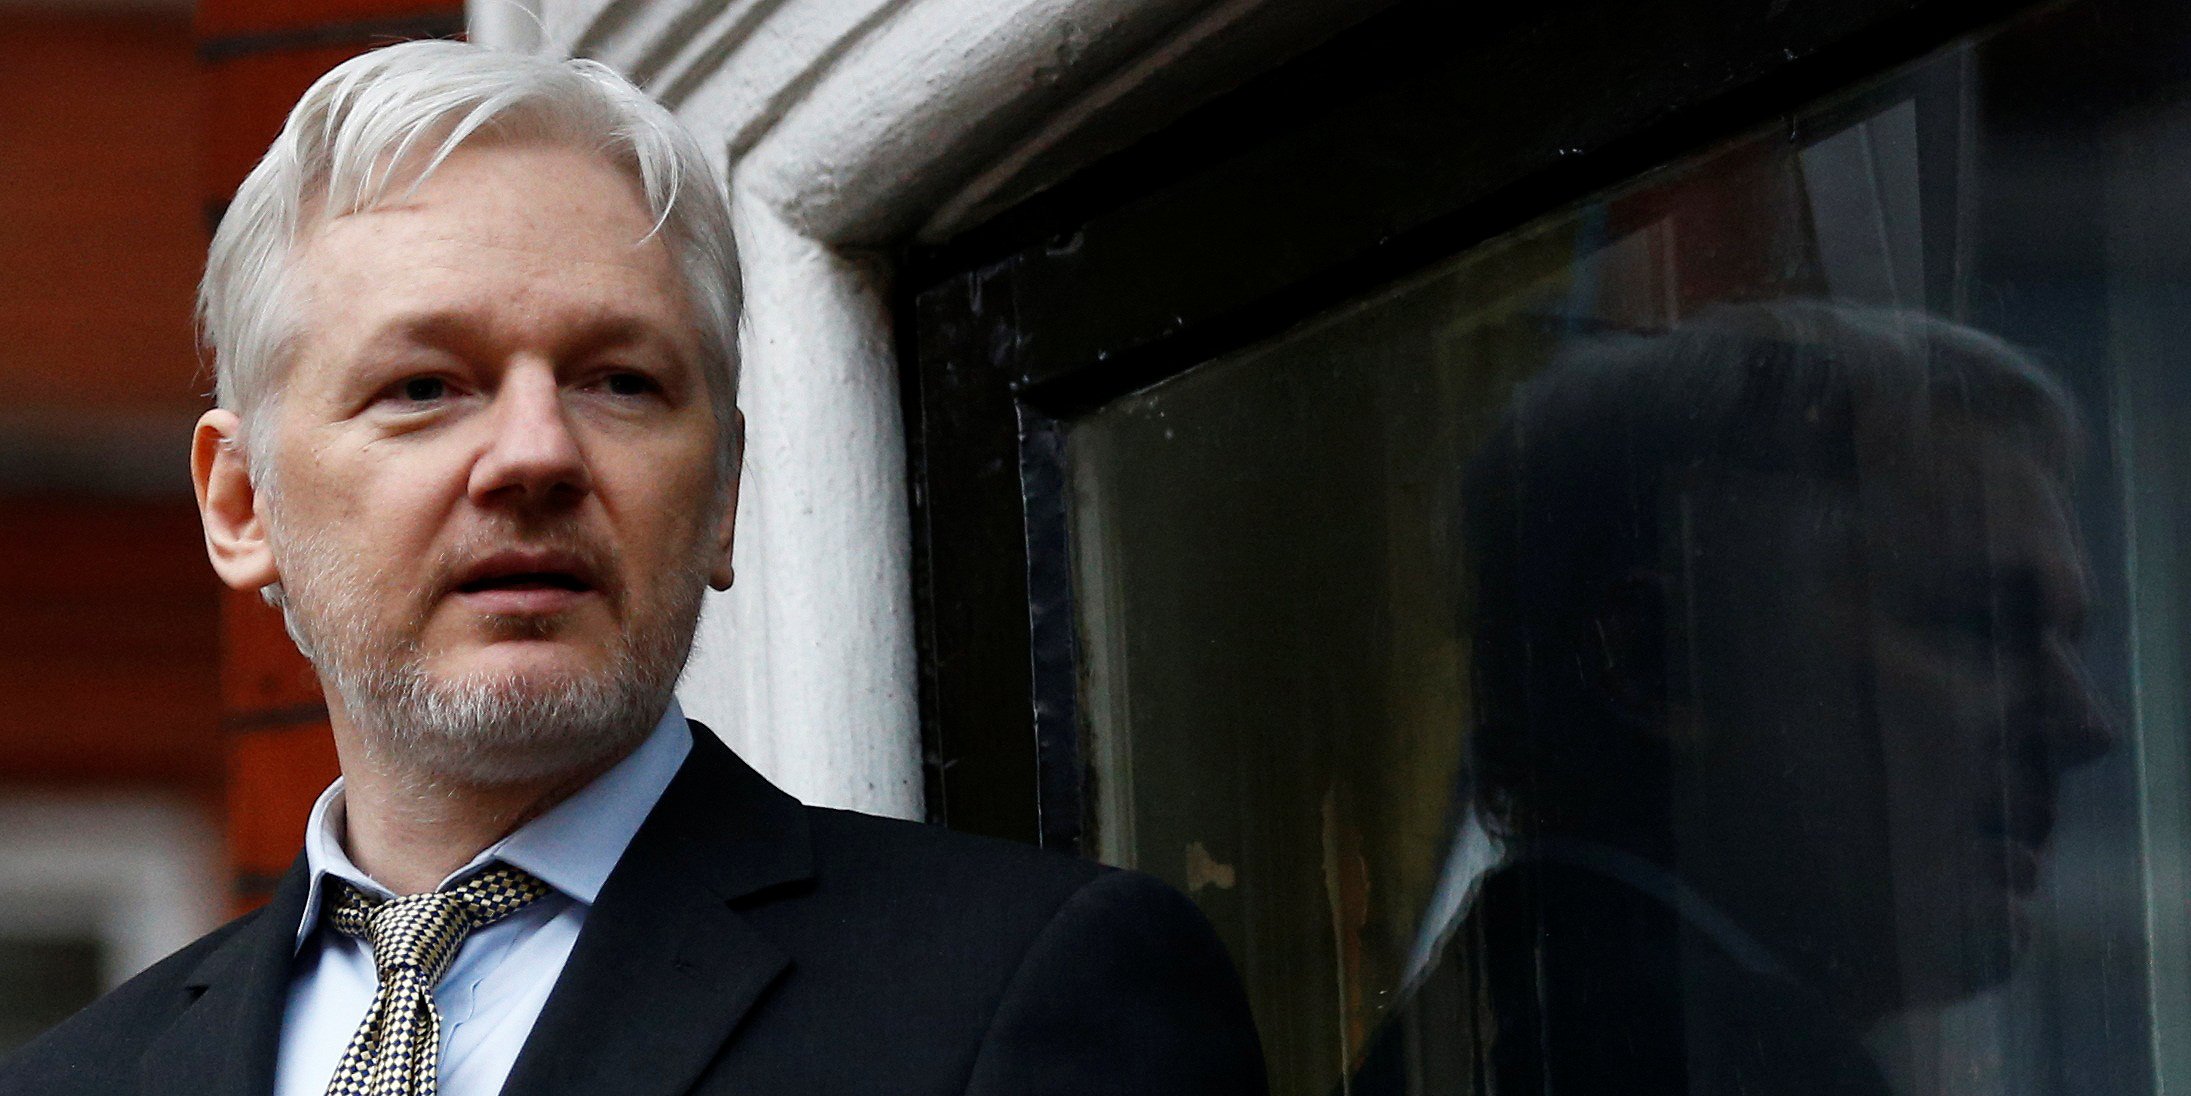 Espionage charges against Julian Assange: a real threat to democracy in the USA